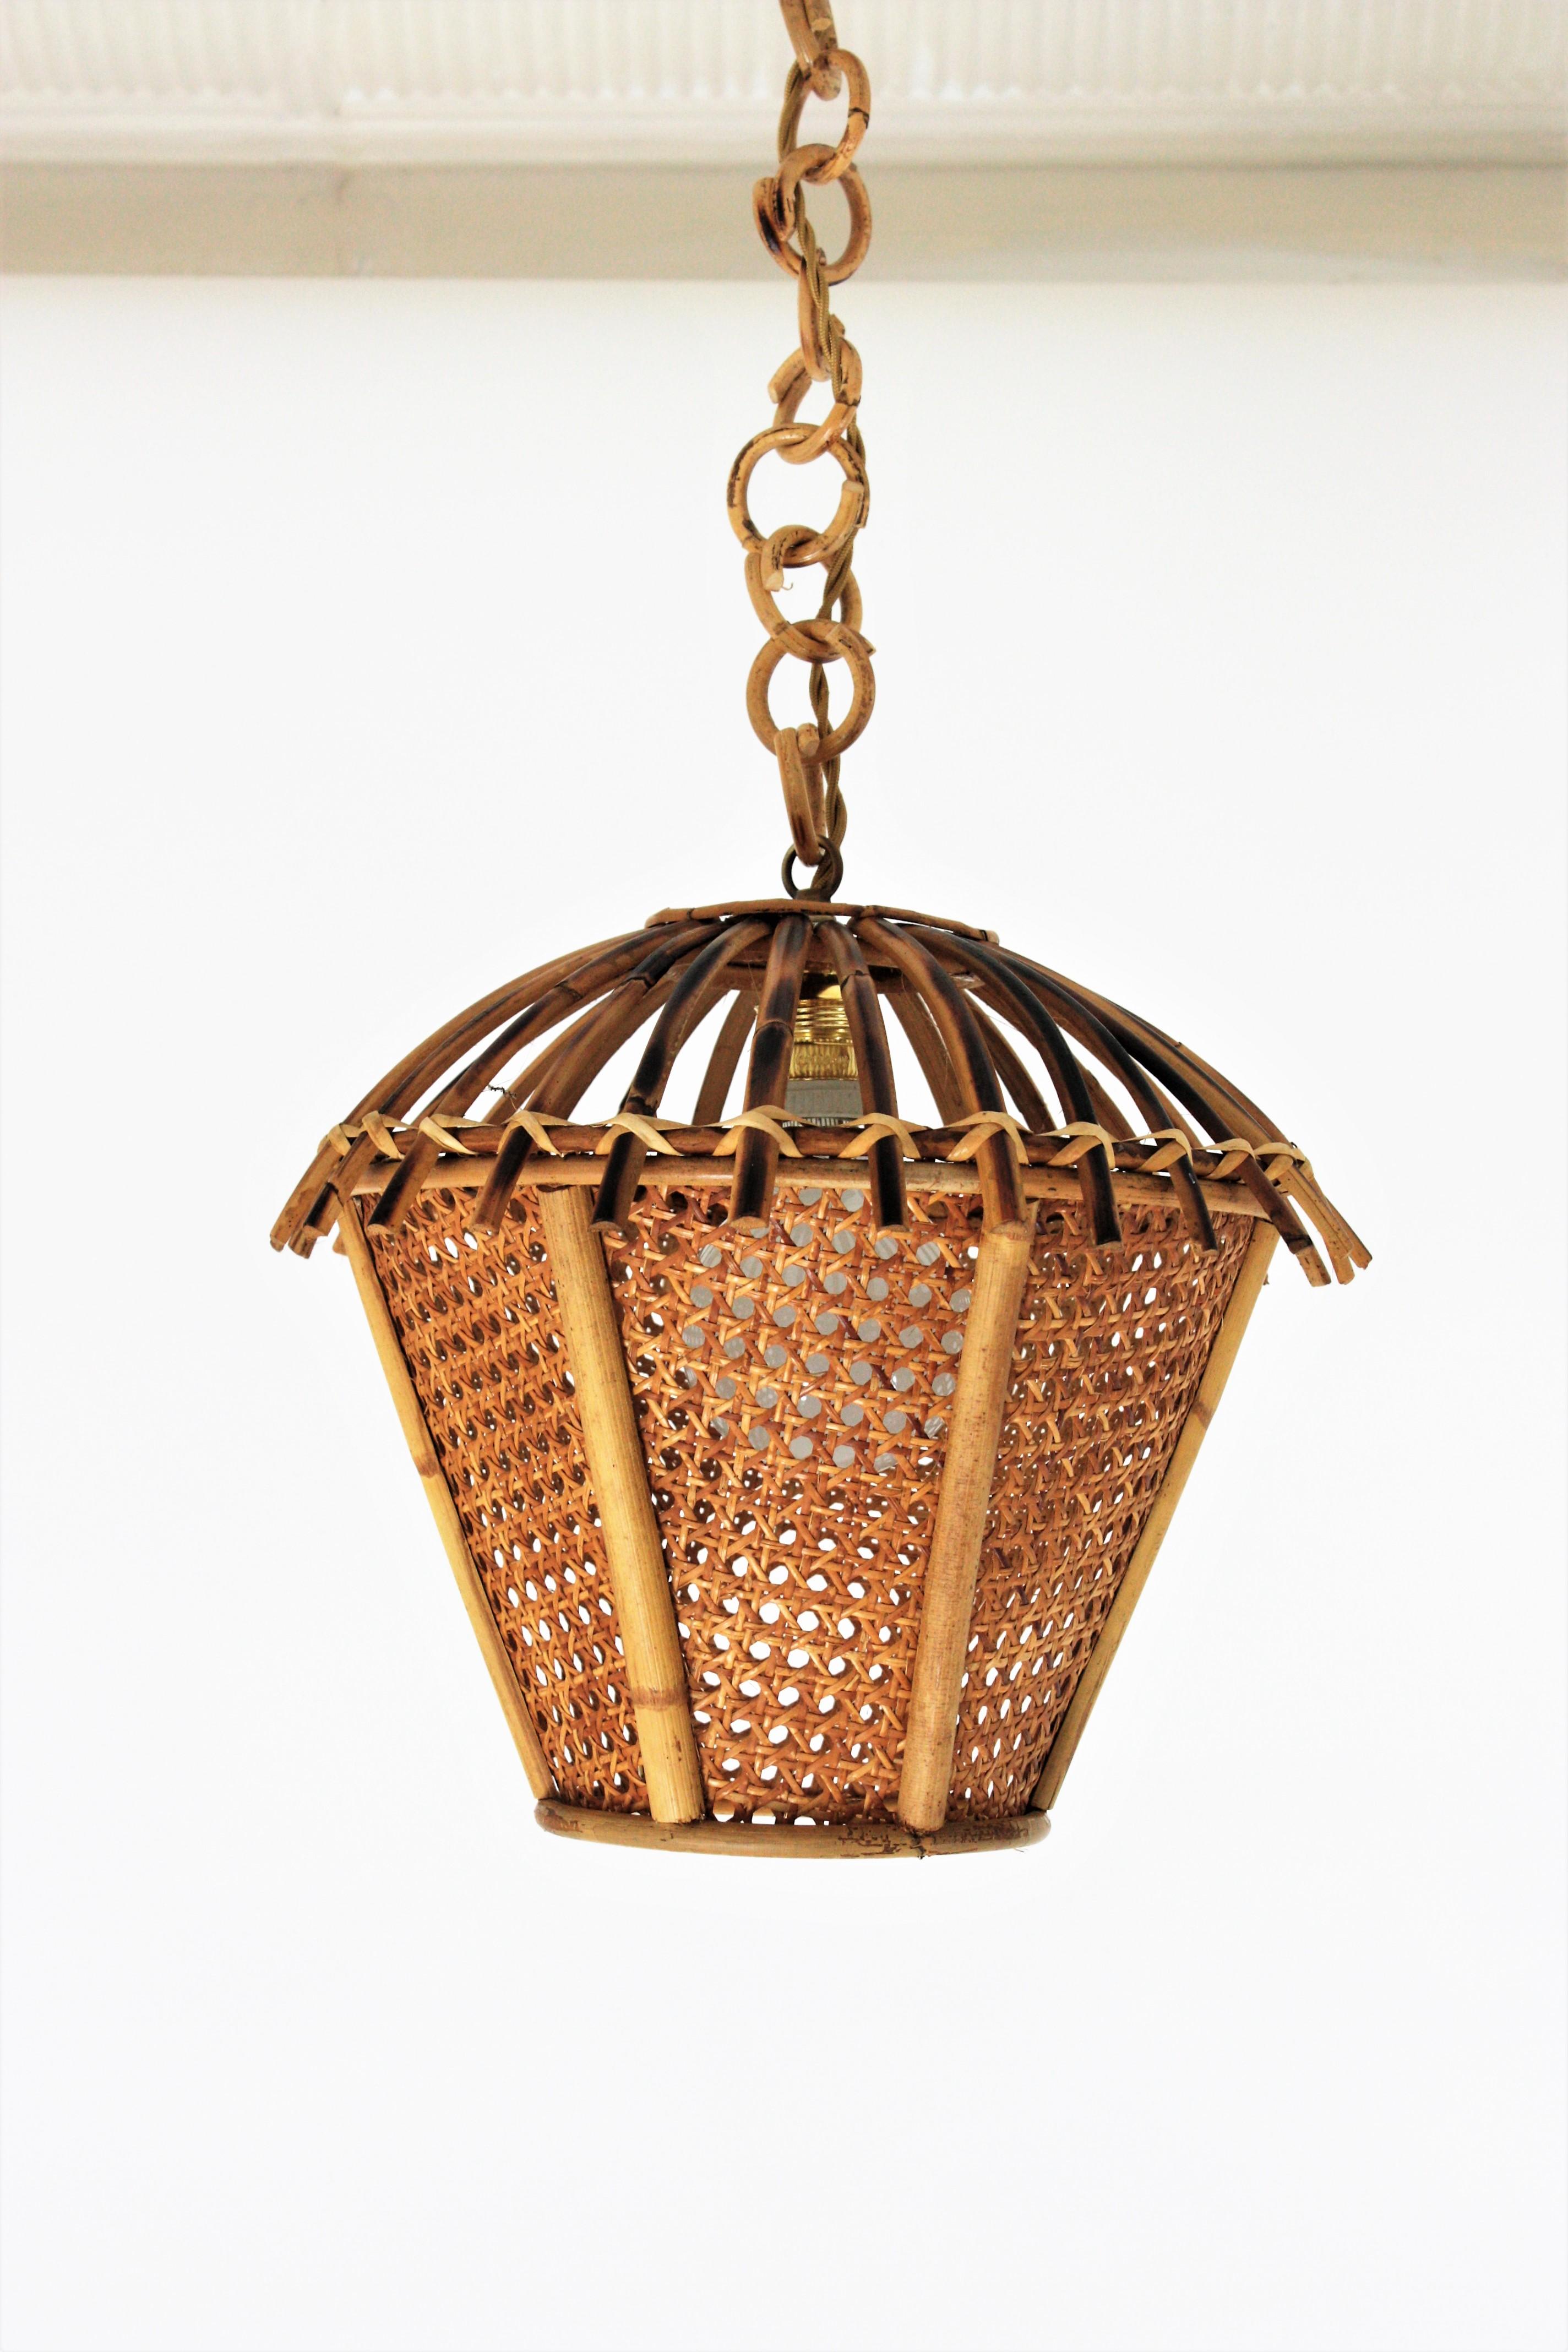 Italian Modernist Rattan and Wicker Wire Pagoda Pendant or Hanging Light, 1960s In Good Condition For Sale In Barcelona, ES